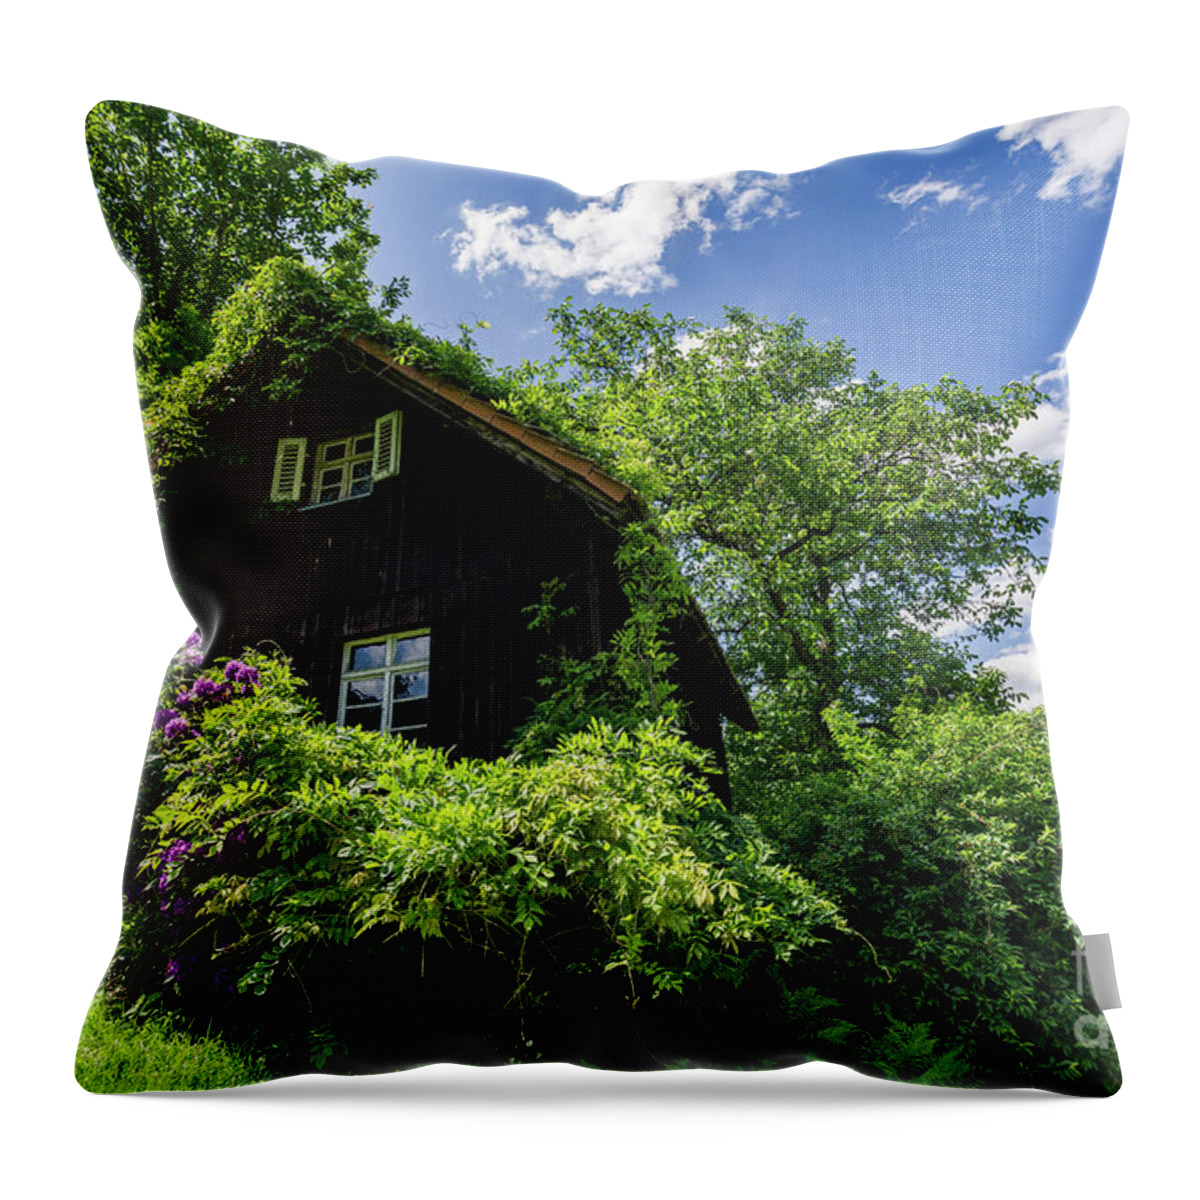 Mill Throw Pillow featuring the photograph The Benz Mill by Eva Lechner